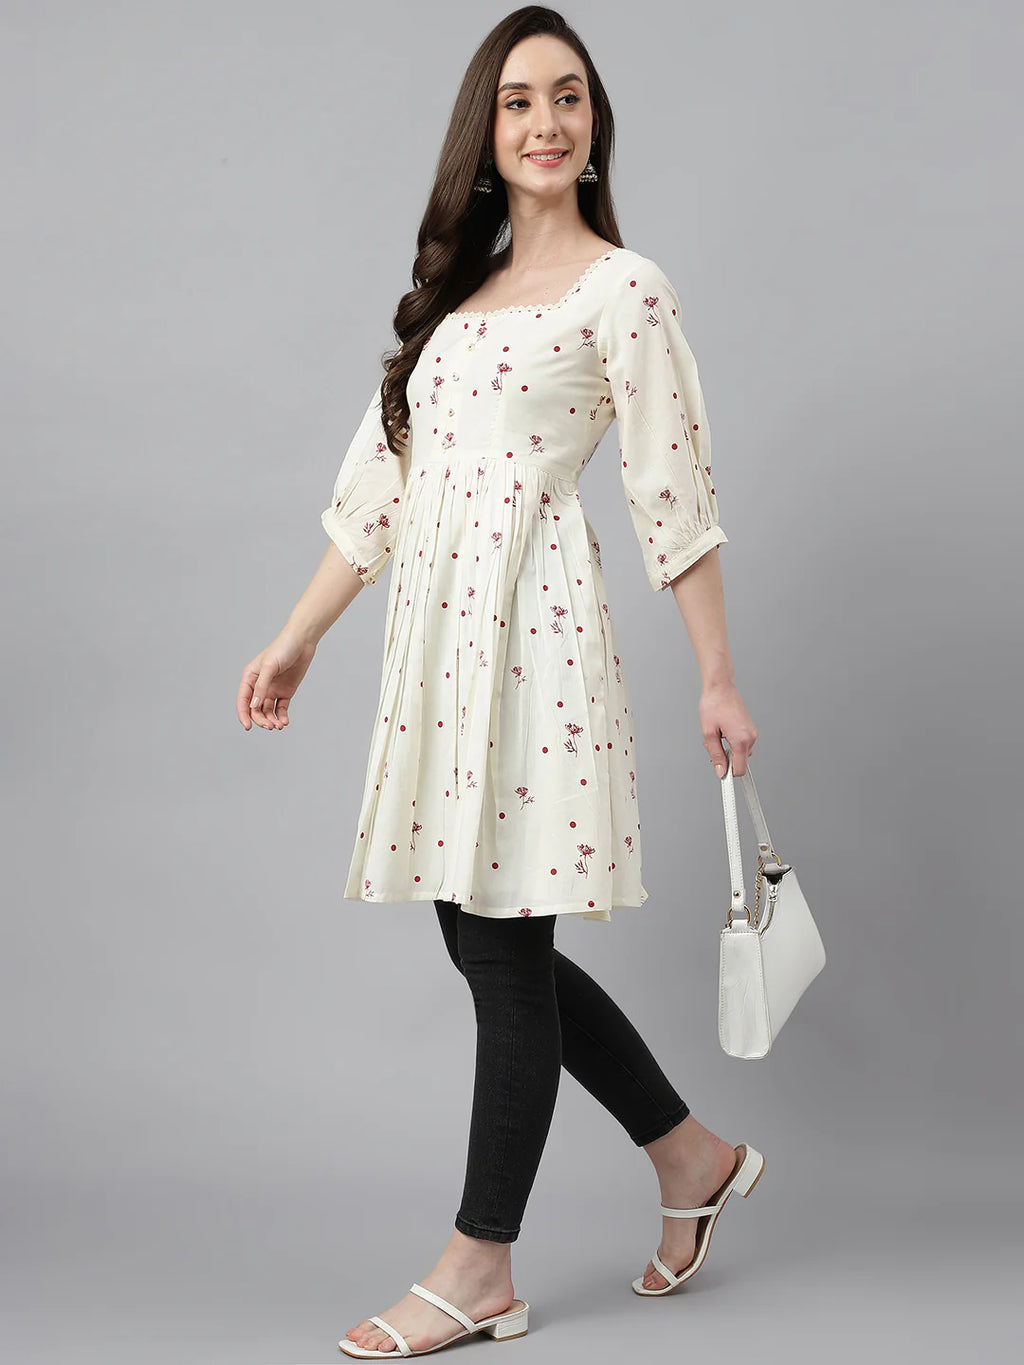 Off White Cotton Polka and Floral Printed Dress